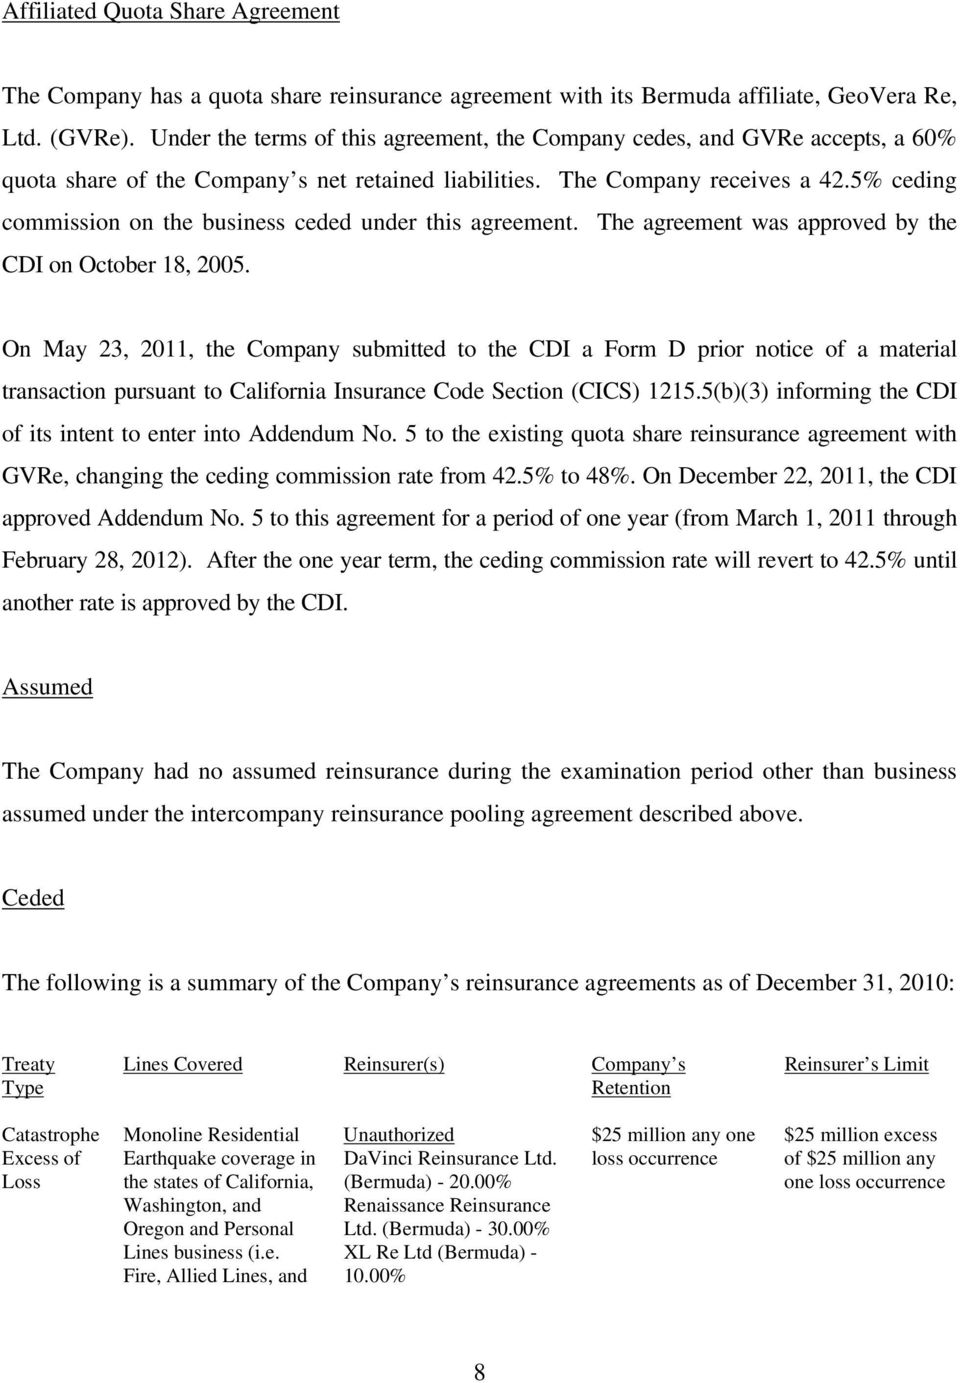 5% ceding commission on the business ceded under this agreement. The agreement was approved by the CDI on October 18, 2005.